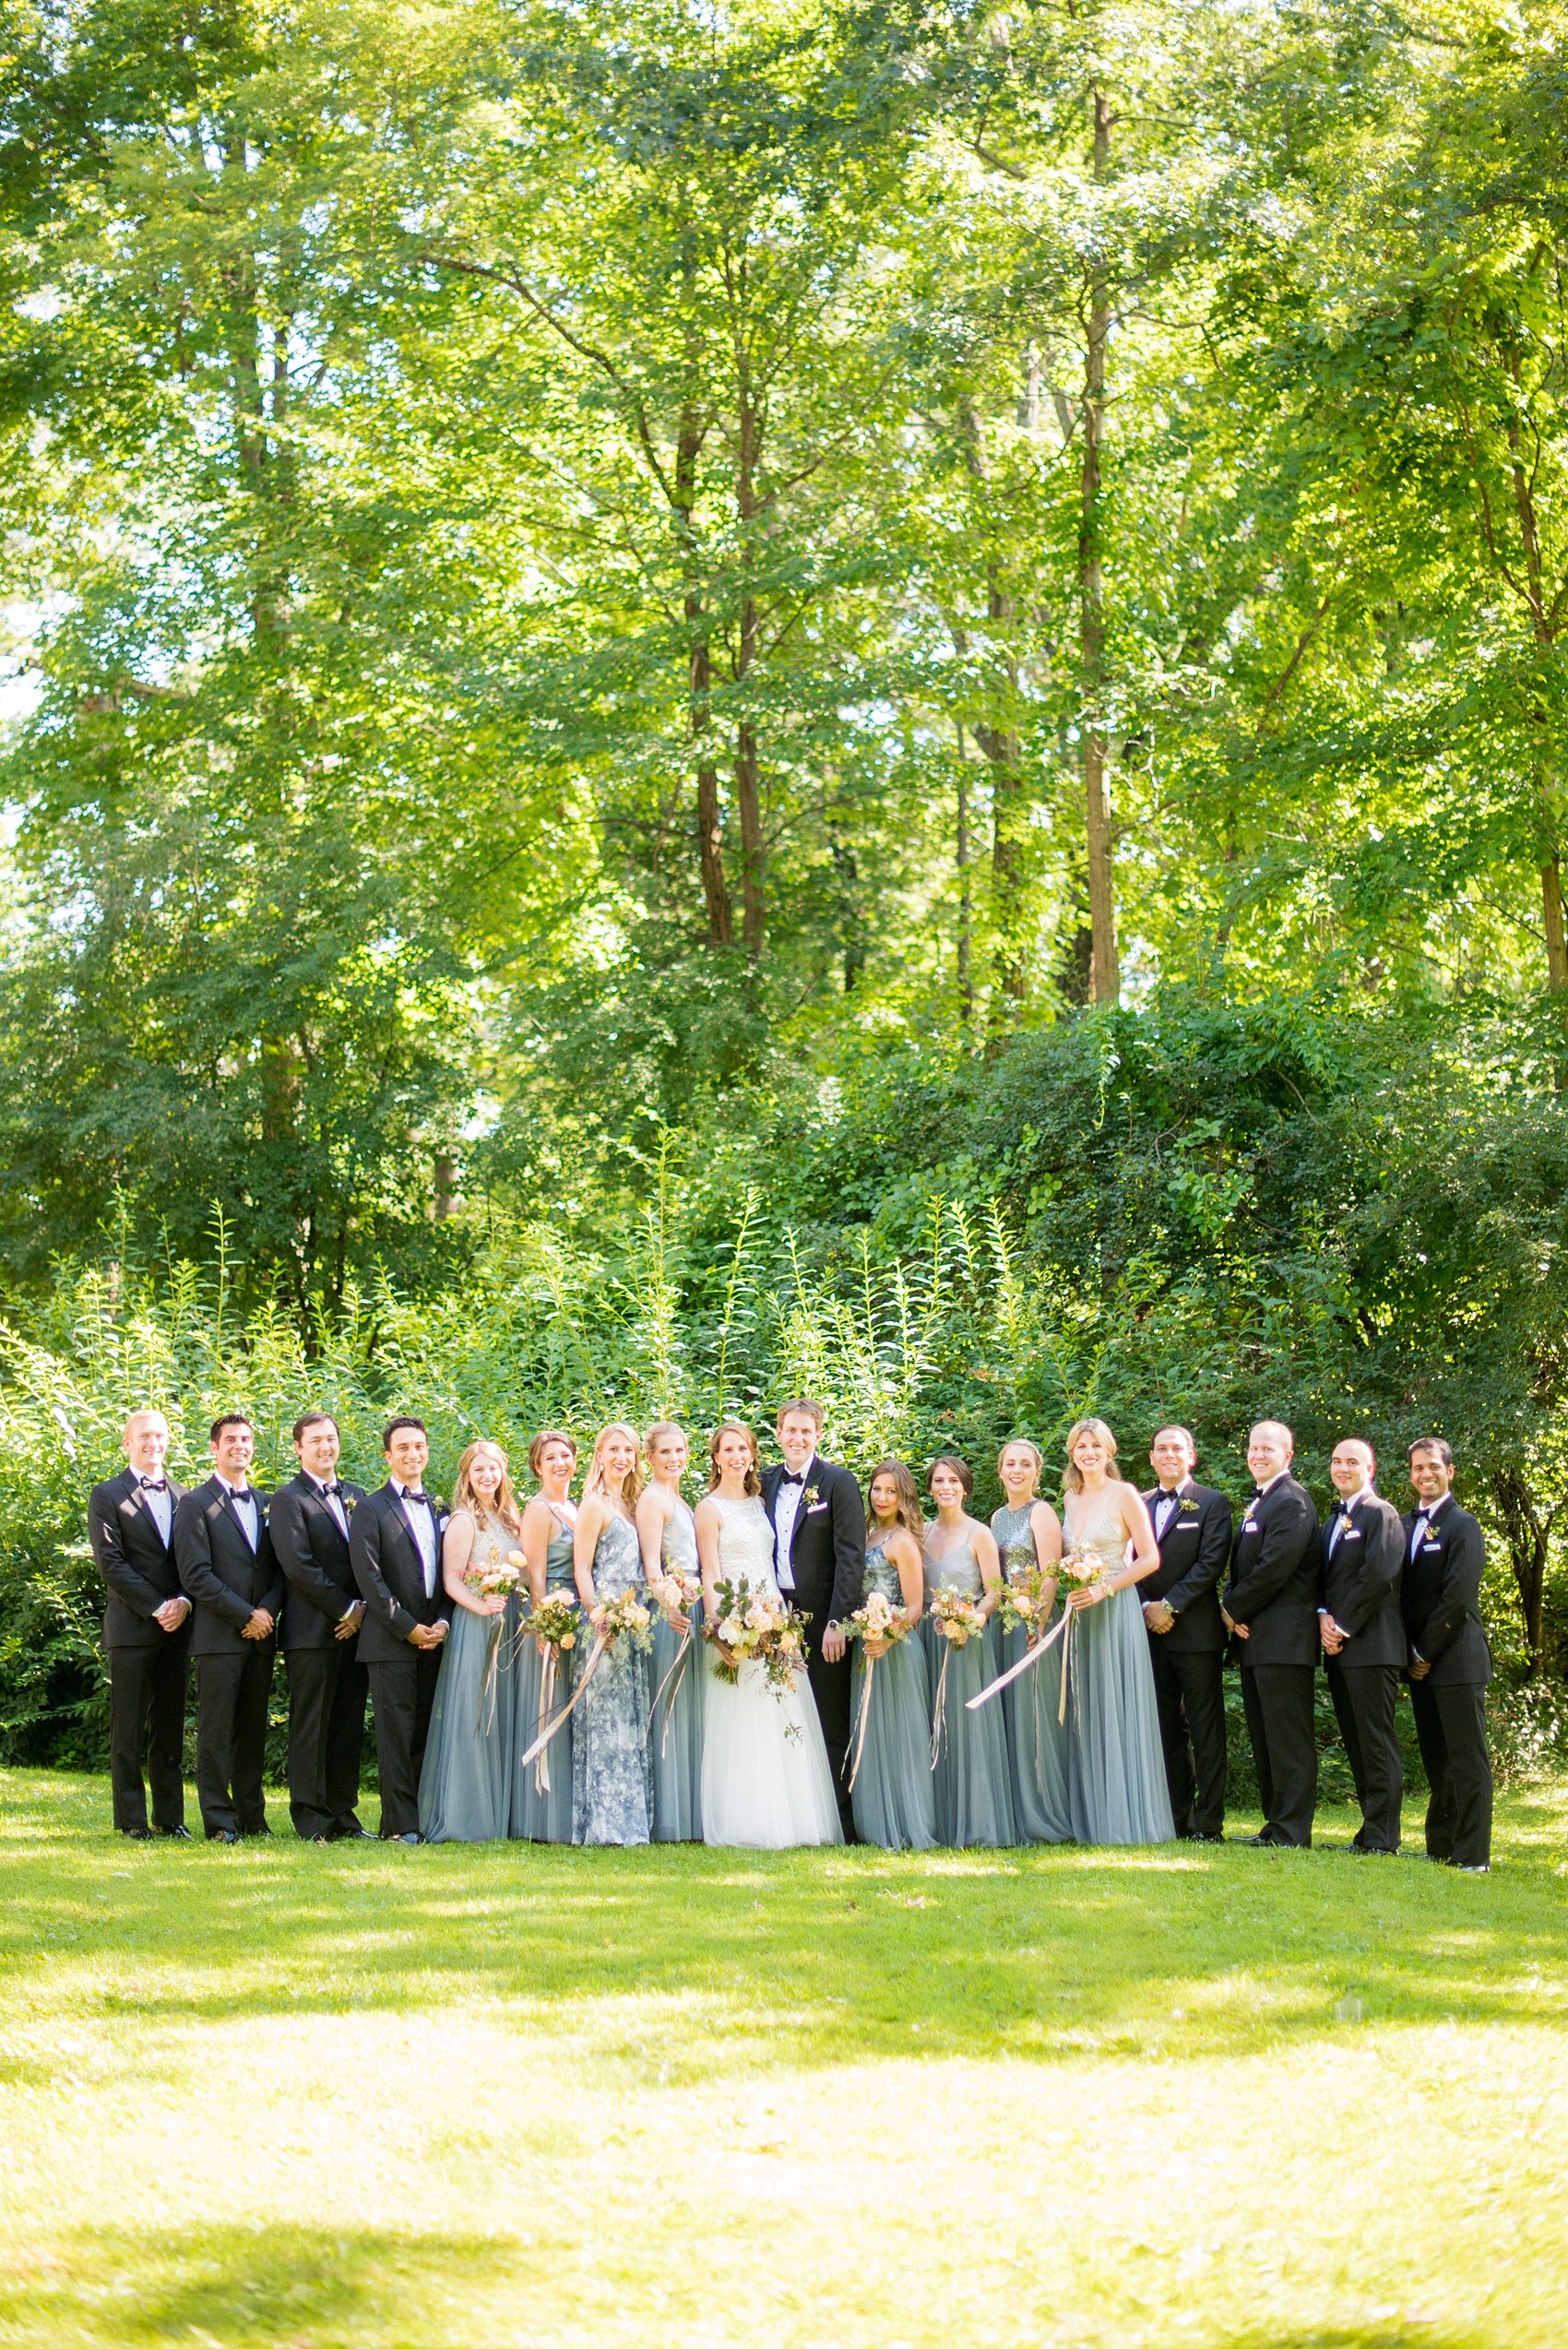 Mikkel Paige Photography photos from a Southwood Estate Wedding in Germantown, New York in the Hudson Valley. Picture of the bride and her bridal party in cornflower blue skirts with mismatched tops and the groomsmen in classic black tuxedos and bow ties.